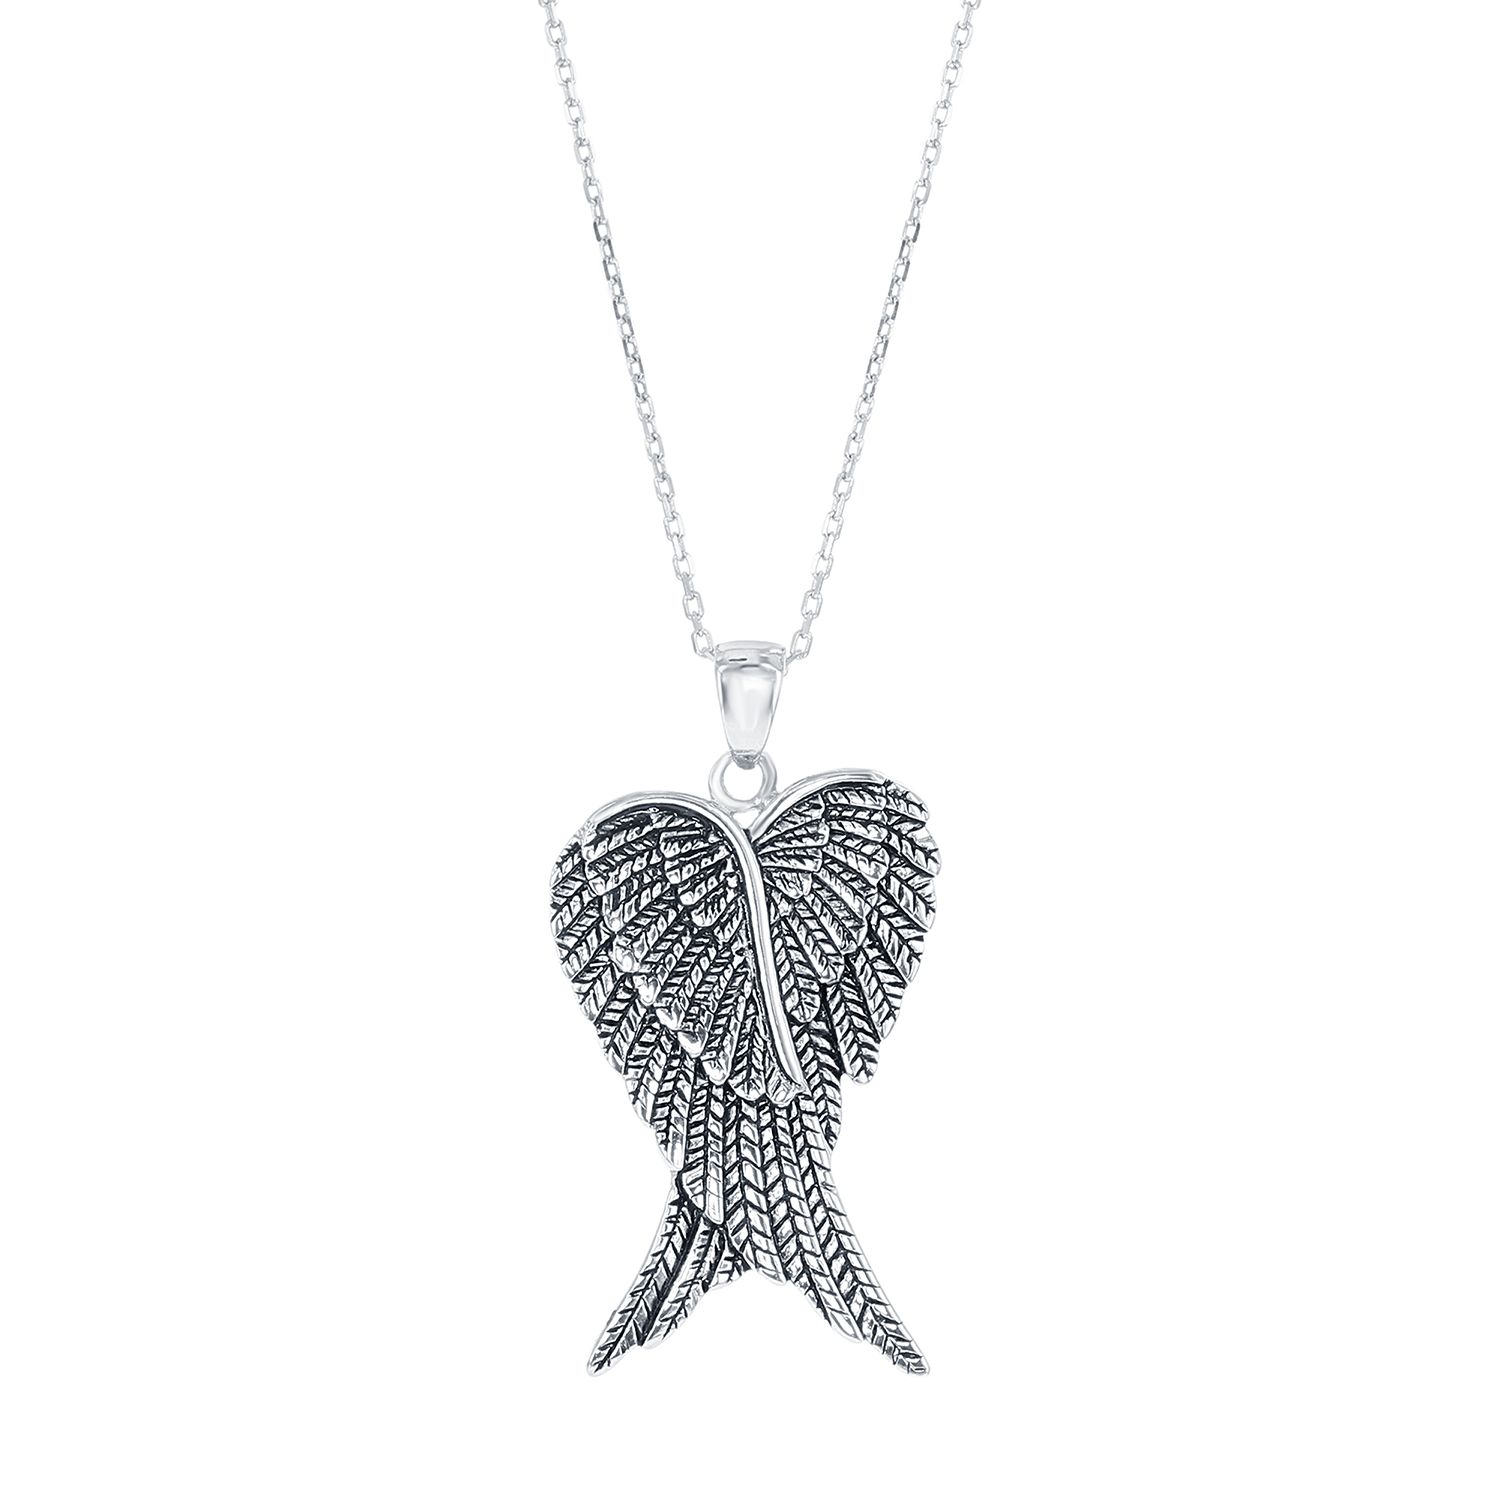 925 Sterling Silver Angel Wing Design Paved Cubic Zircon Pendant Necklace 18"